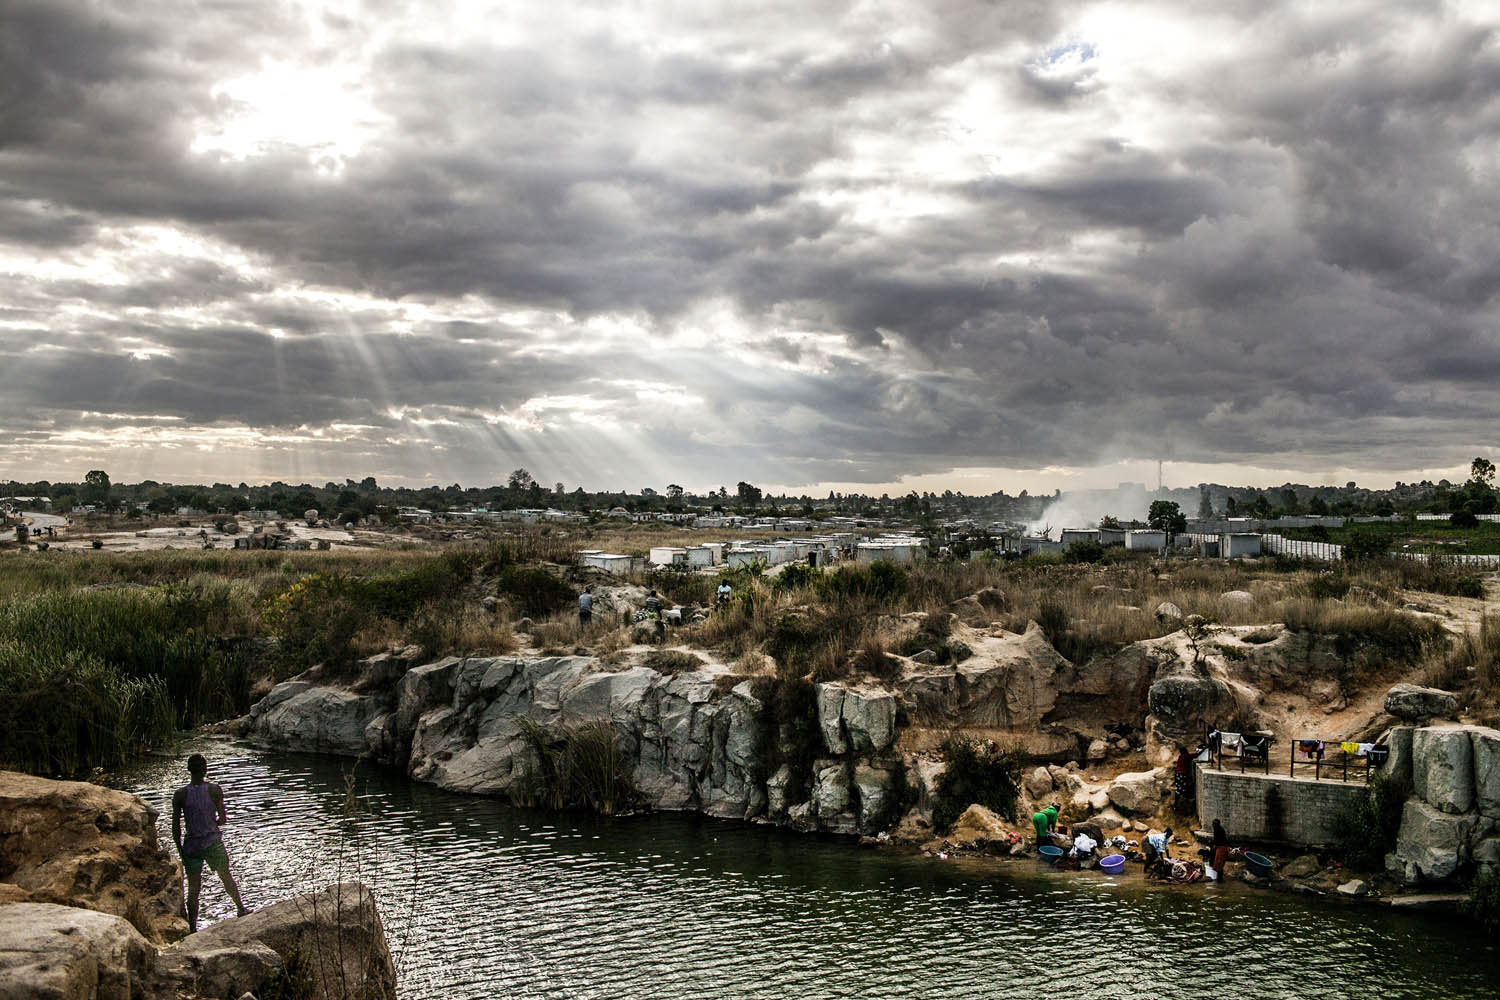 People at a quarry in Epworth, a suburb in Harare, Zimbabwe.